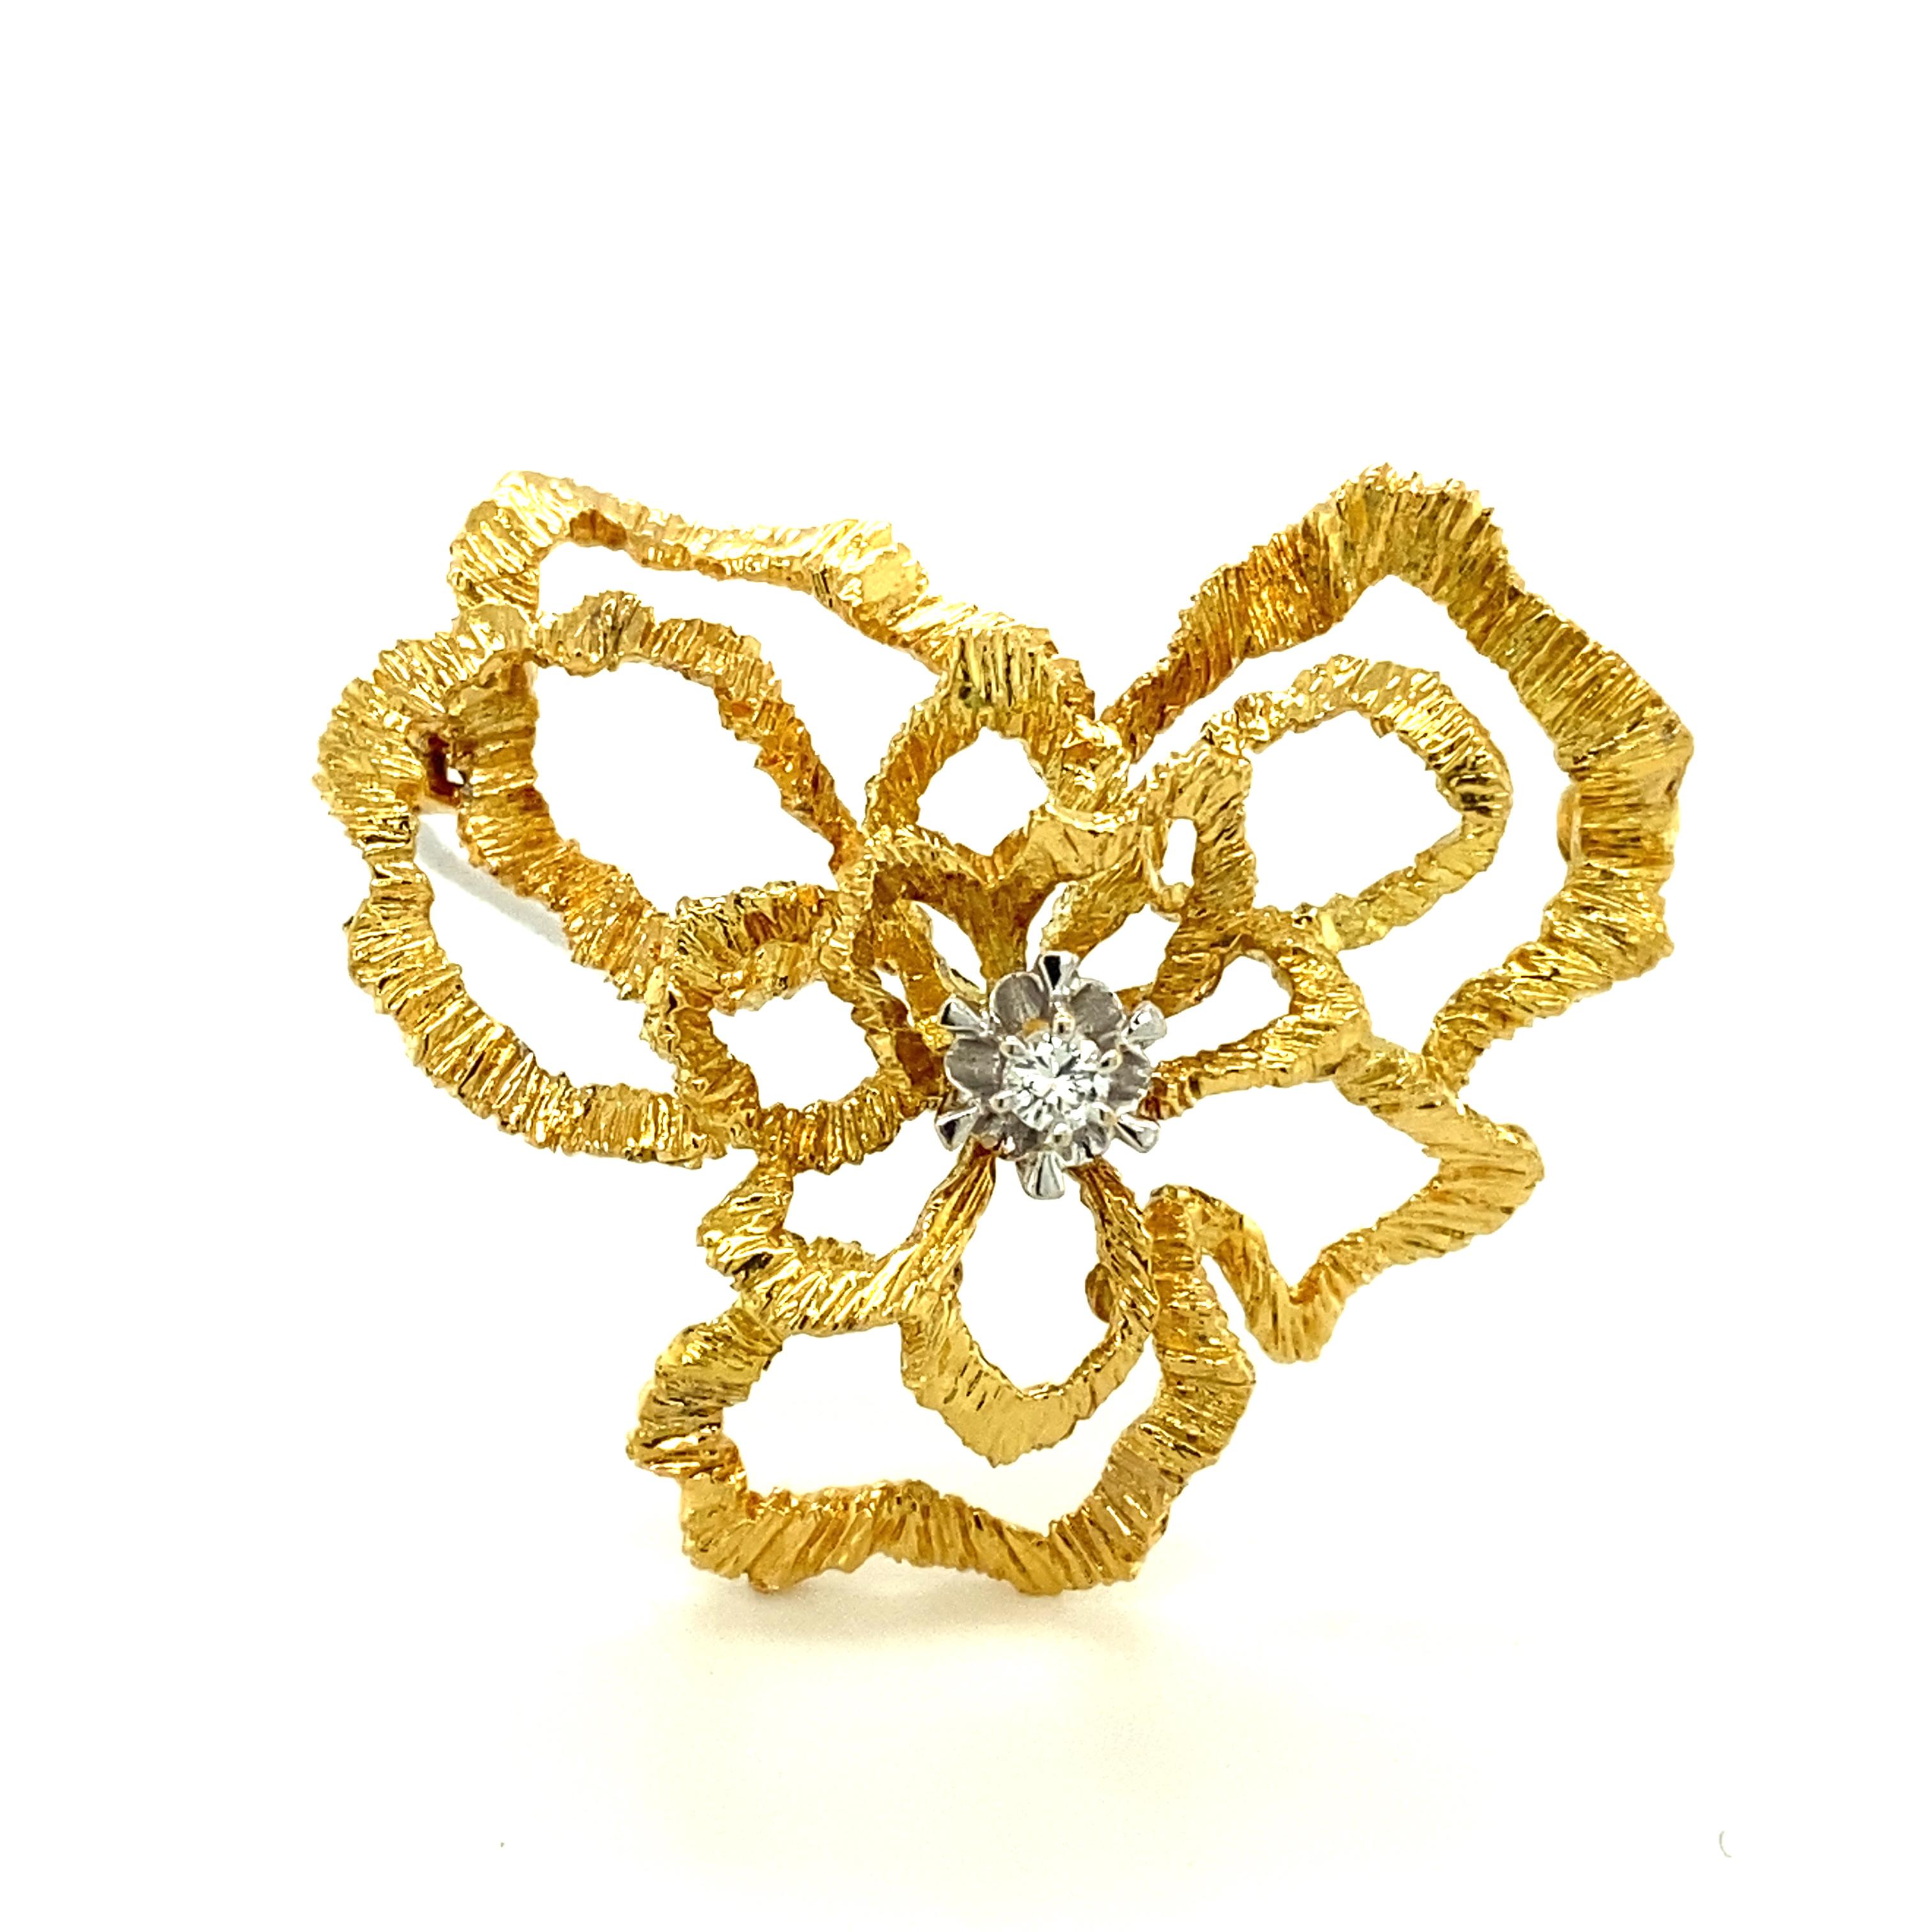 This enchantingly airy flower brooch in 18 karat yellow and white gold is a typical example of the jewellery style of the late 1960s and 1970s: fresh design, structured surface and focus on refined details.
The leaves have a three-dimensional